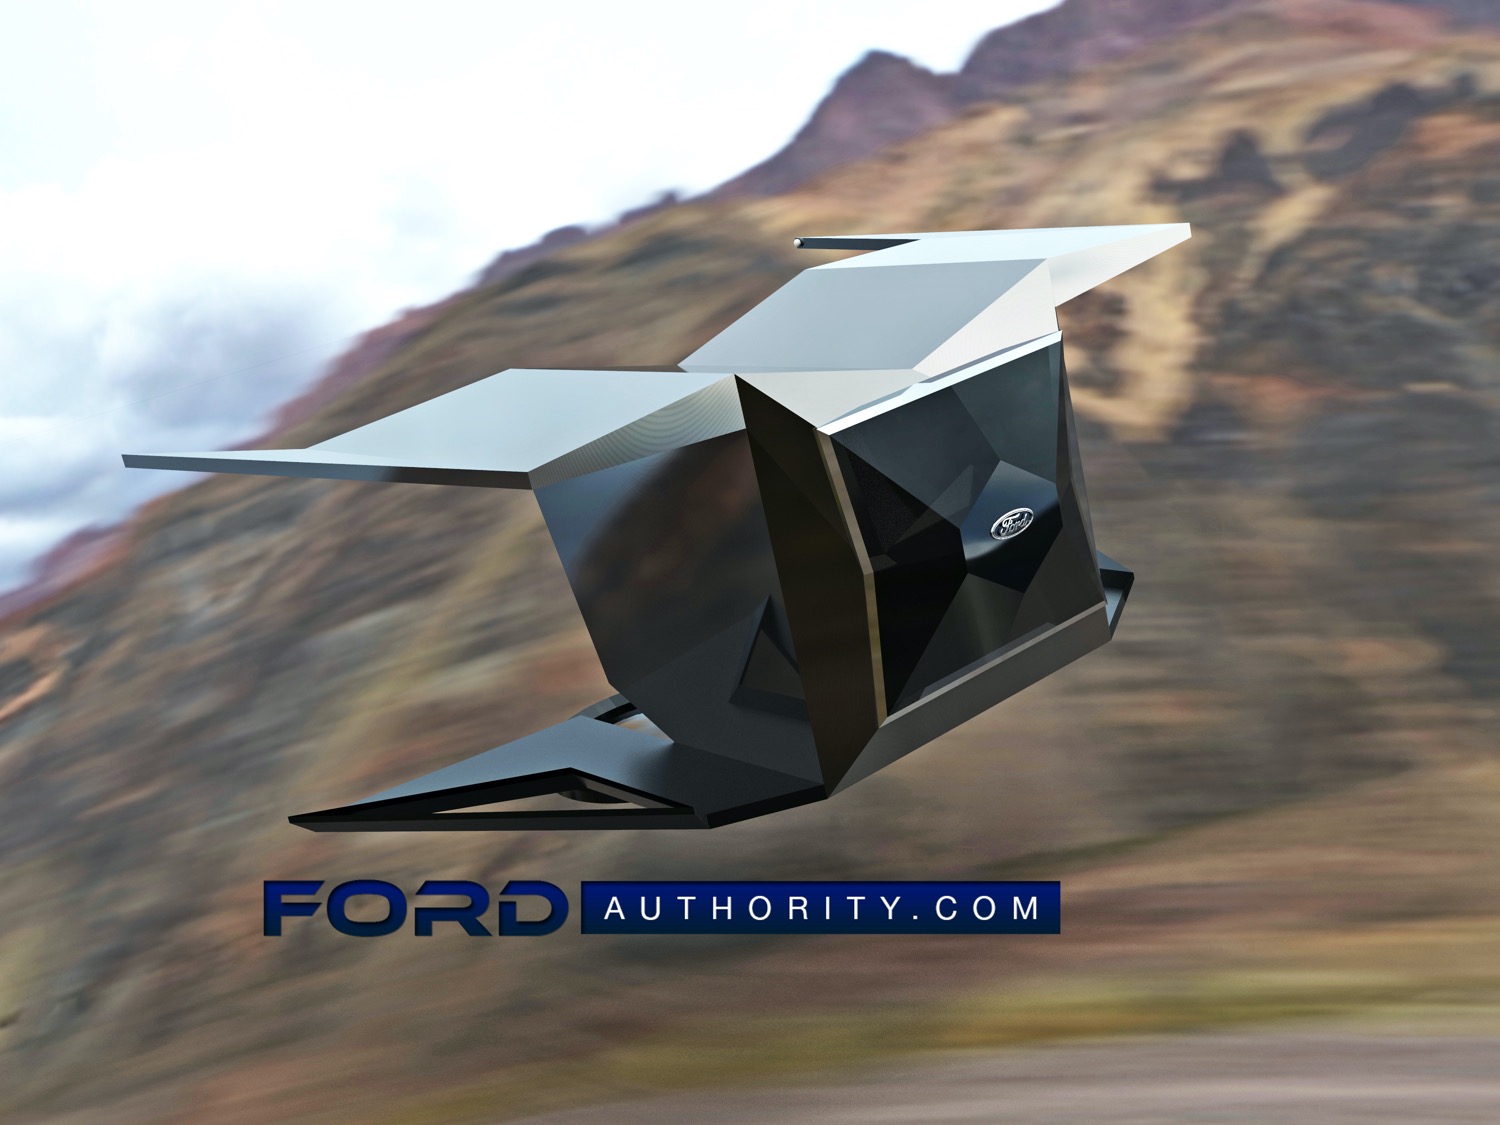 Ford Thunderbird Returns As Vertical TakeOff And Landing Vehicle